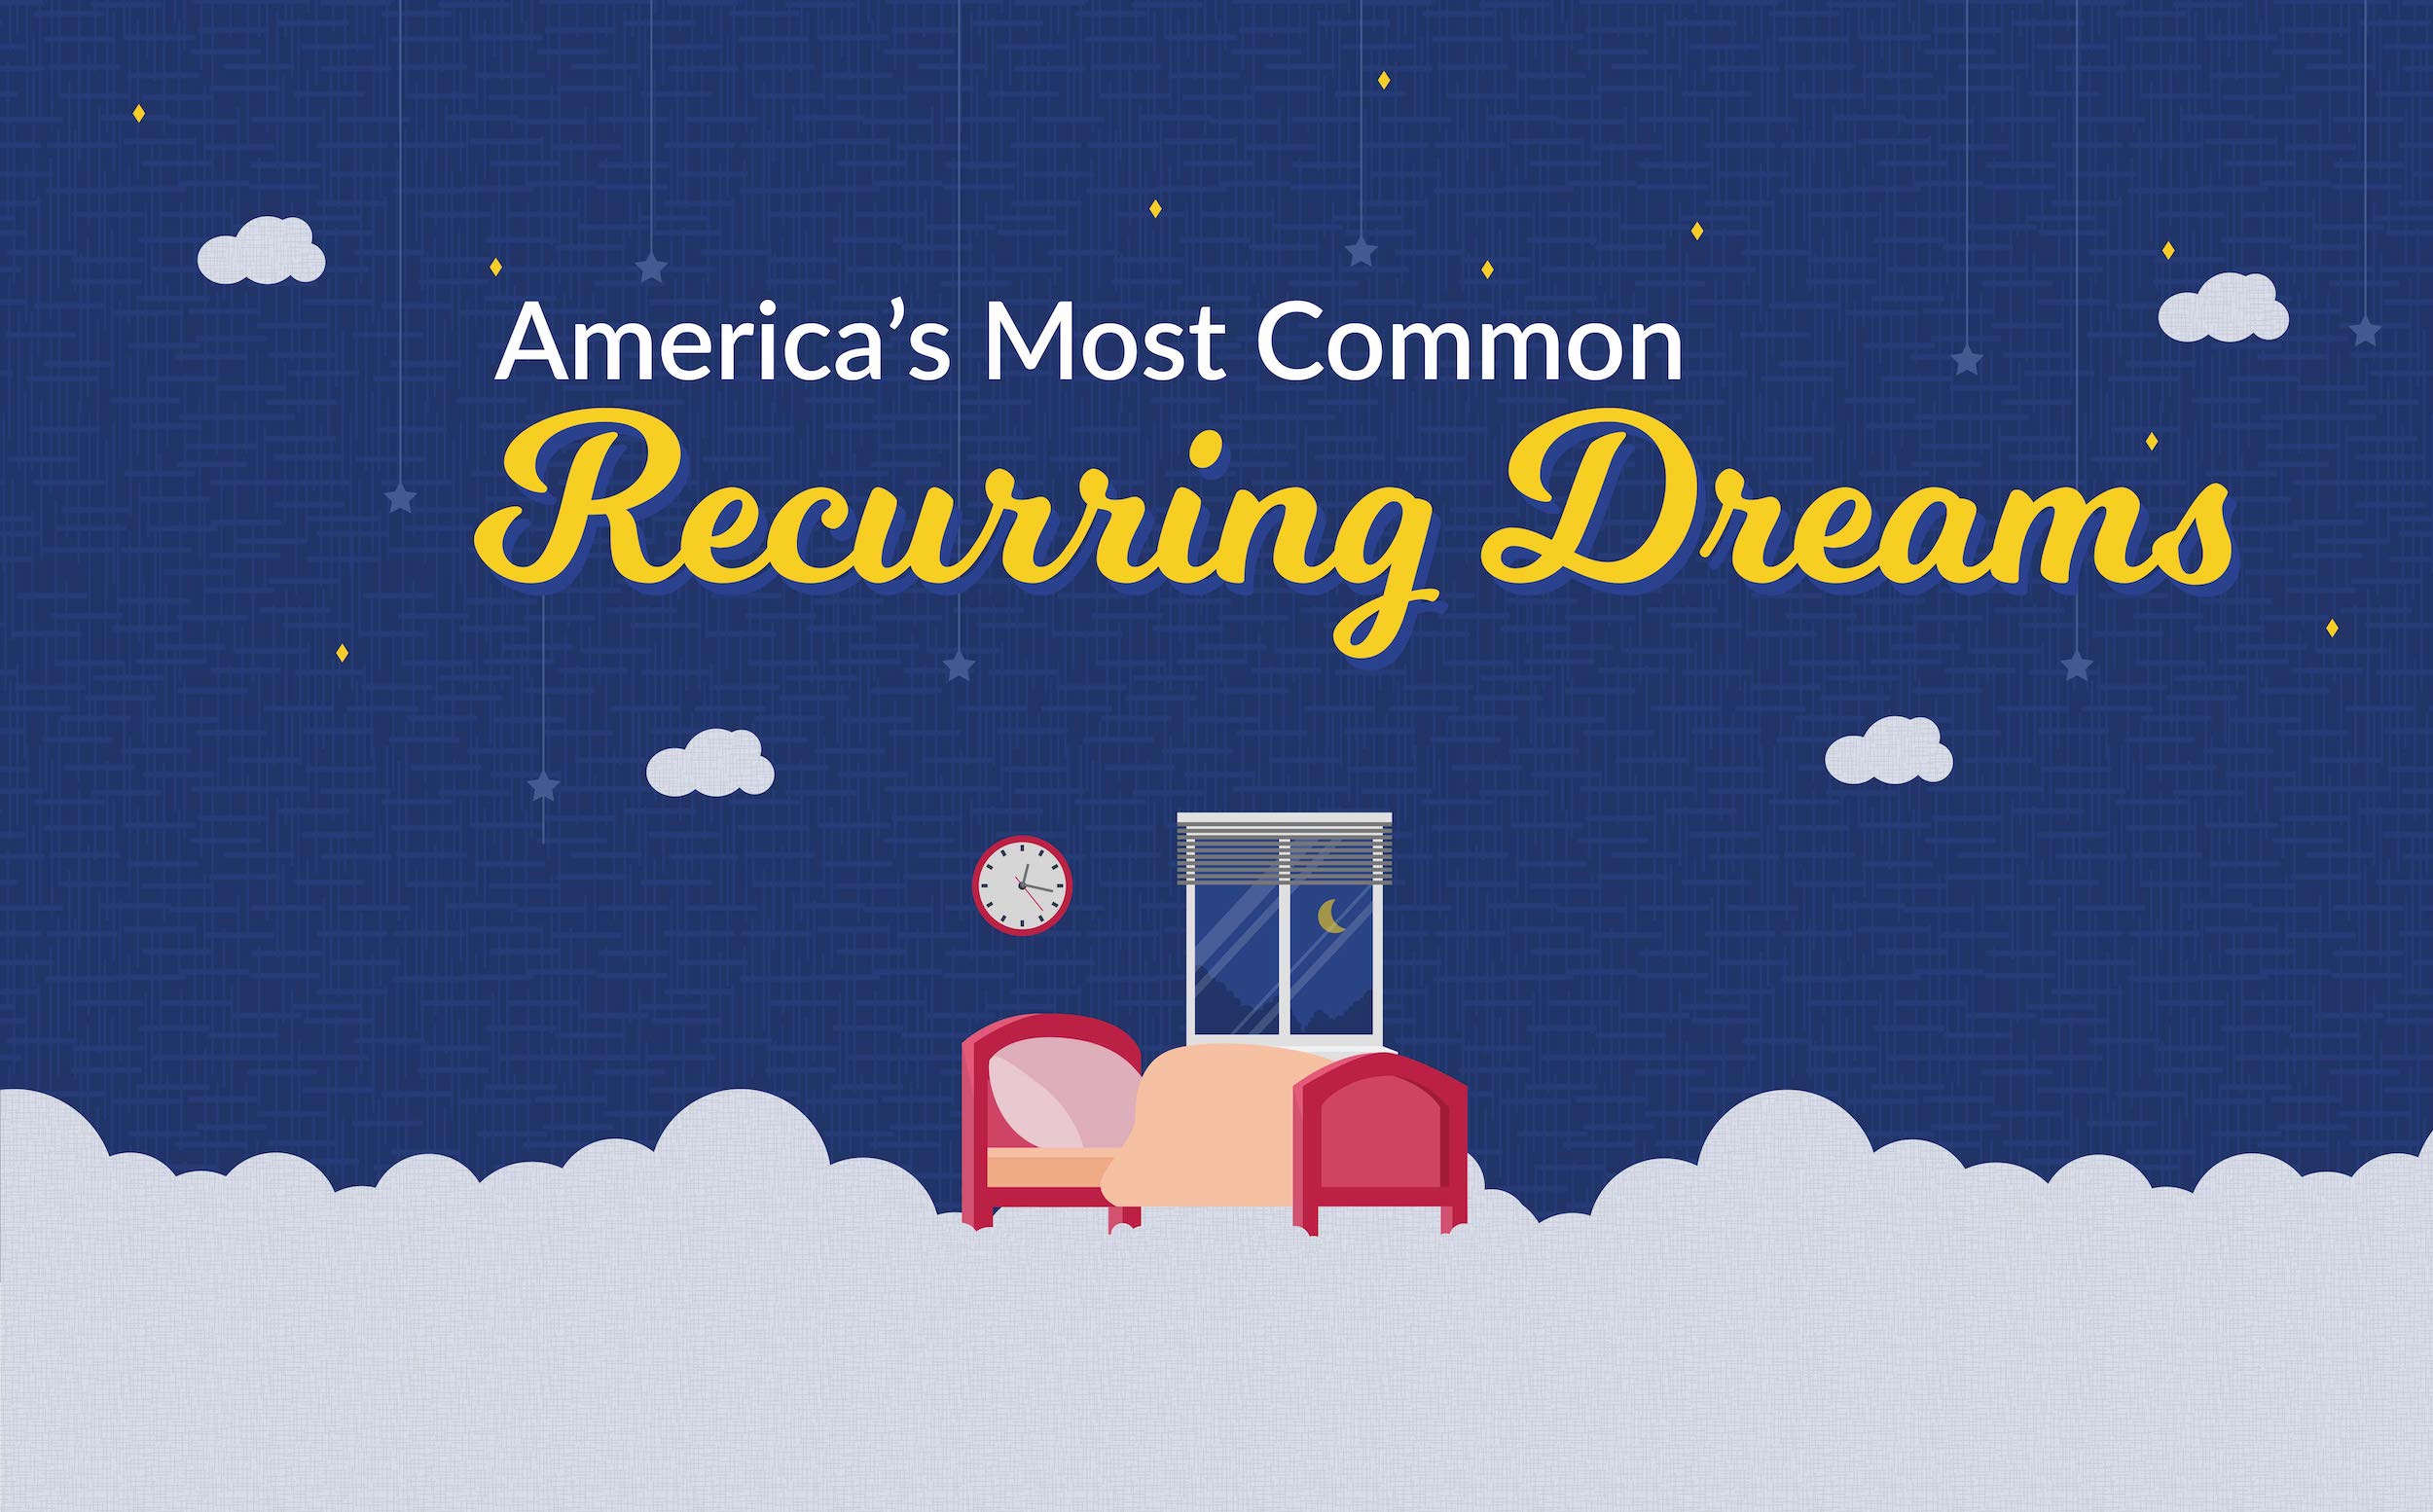 America’s Most Common Recurring Dreams